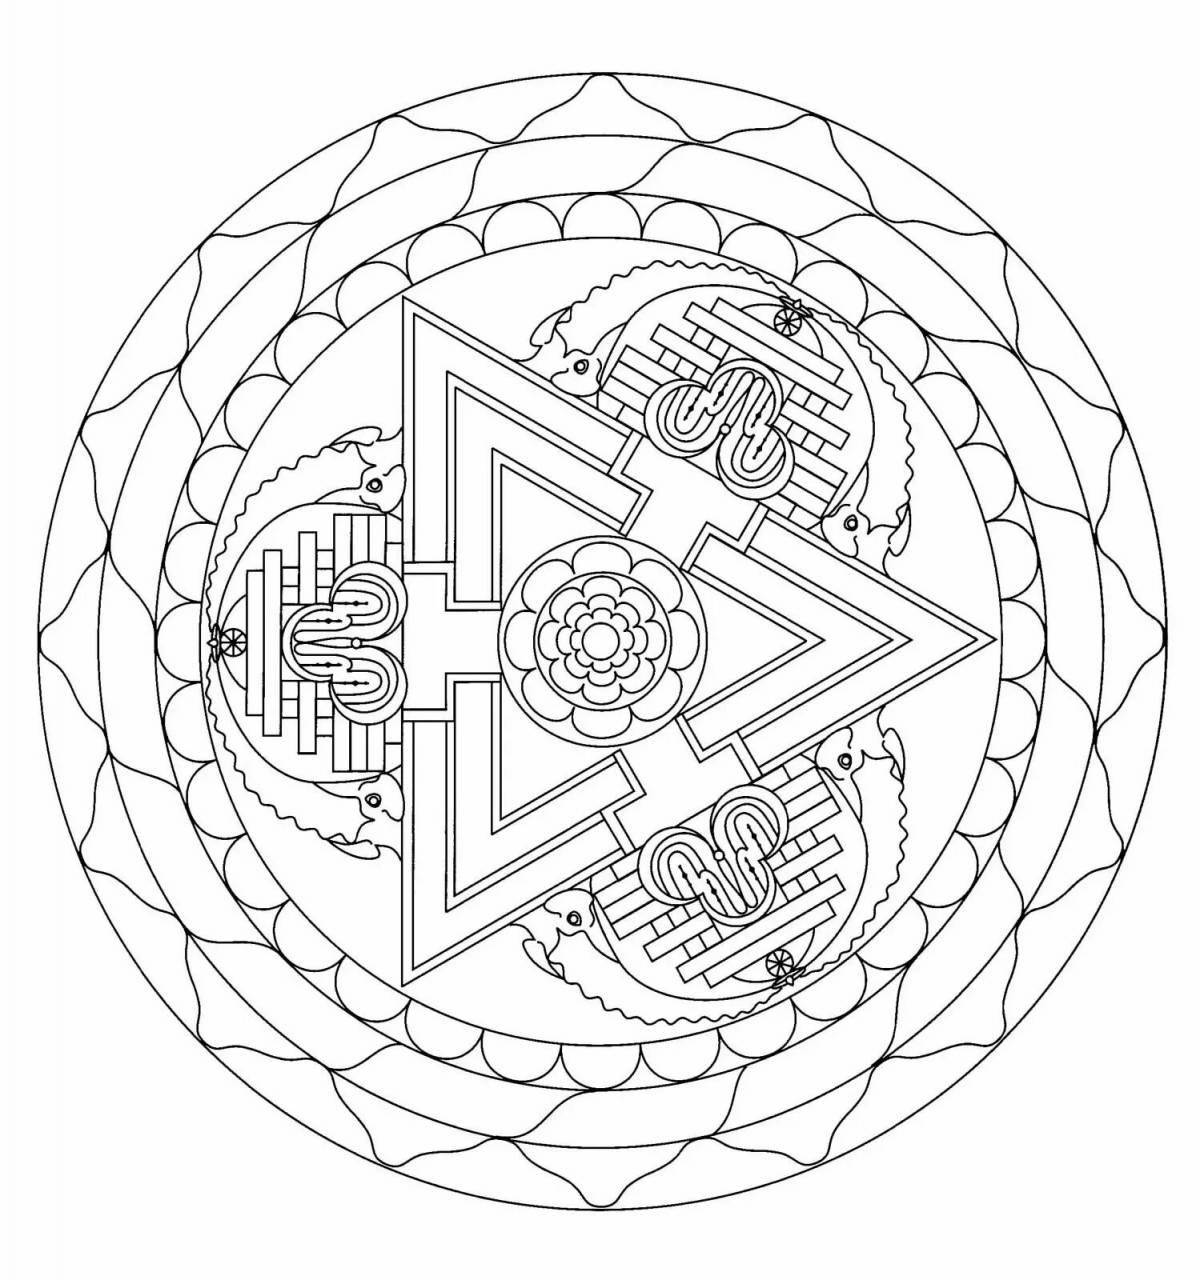 Intriguing coloring book with meaning